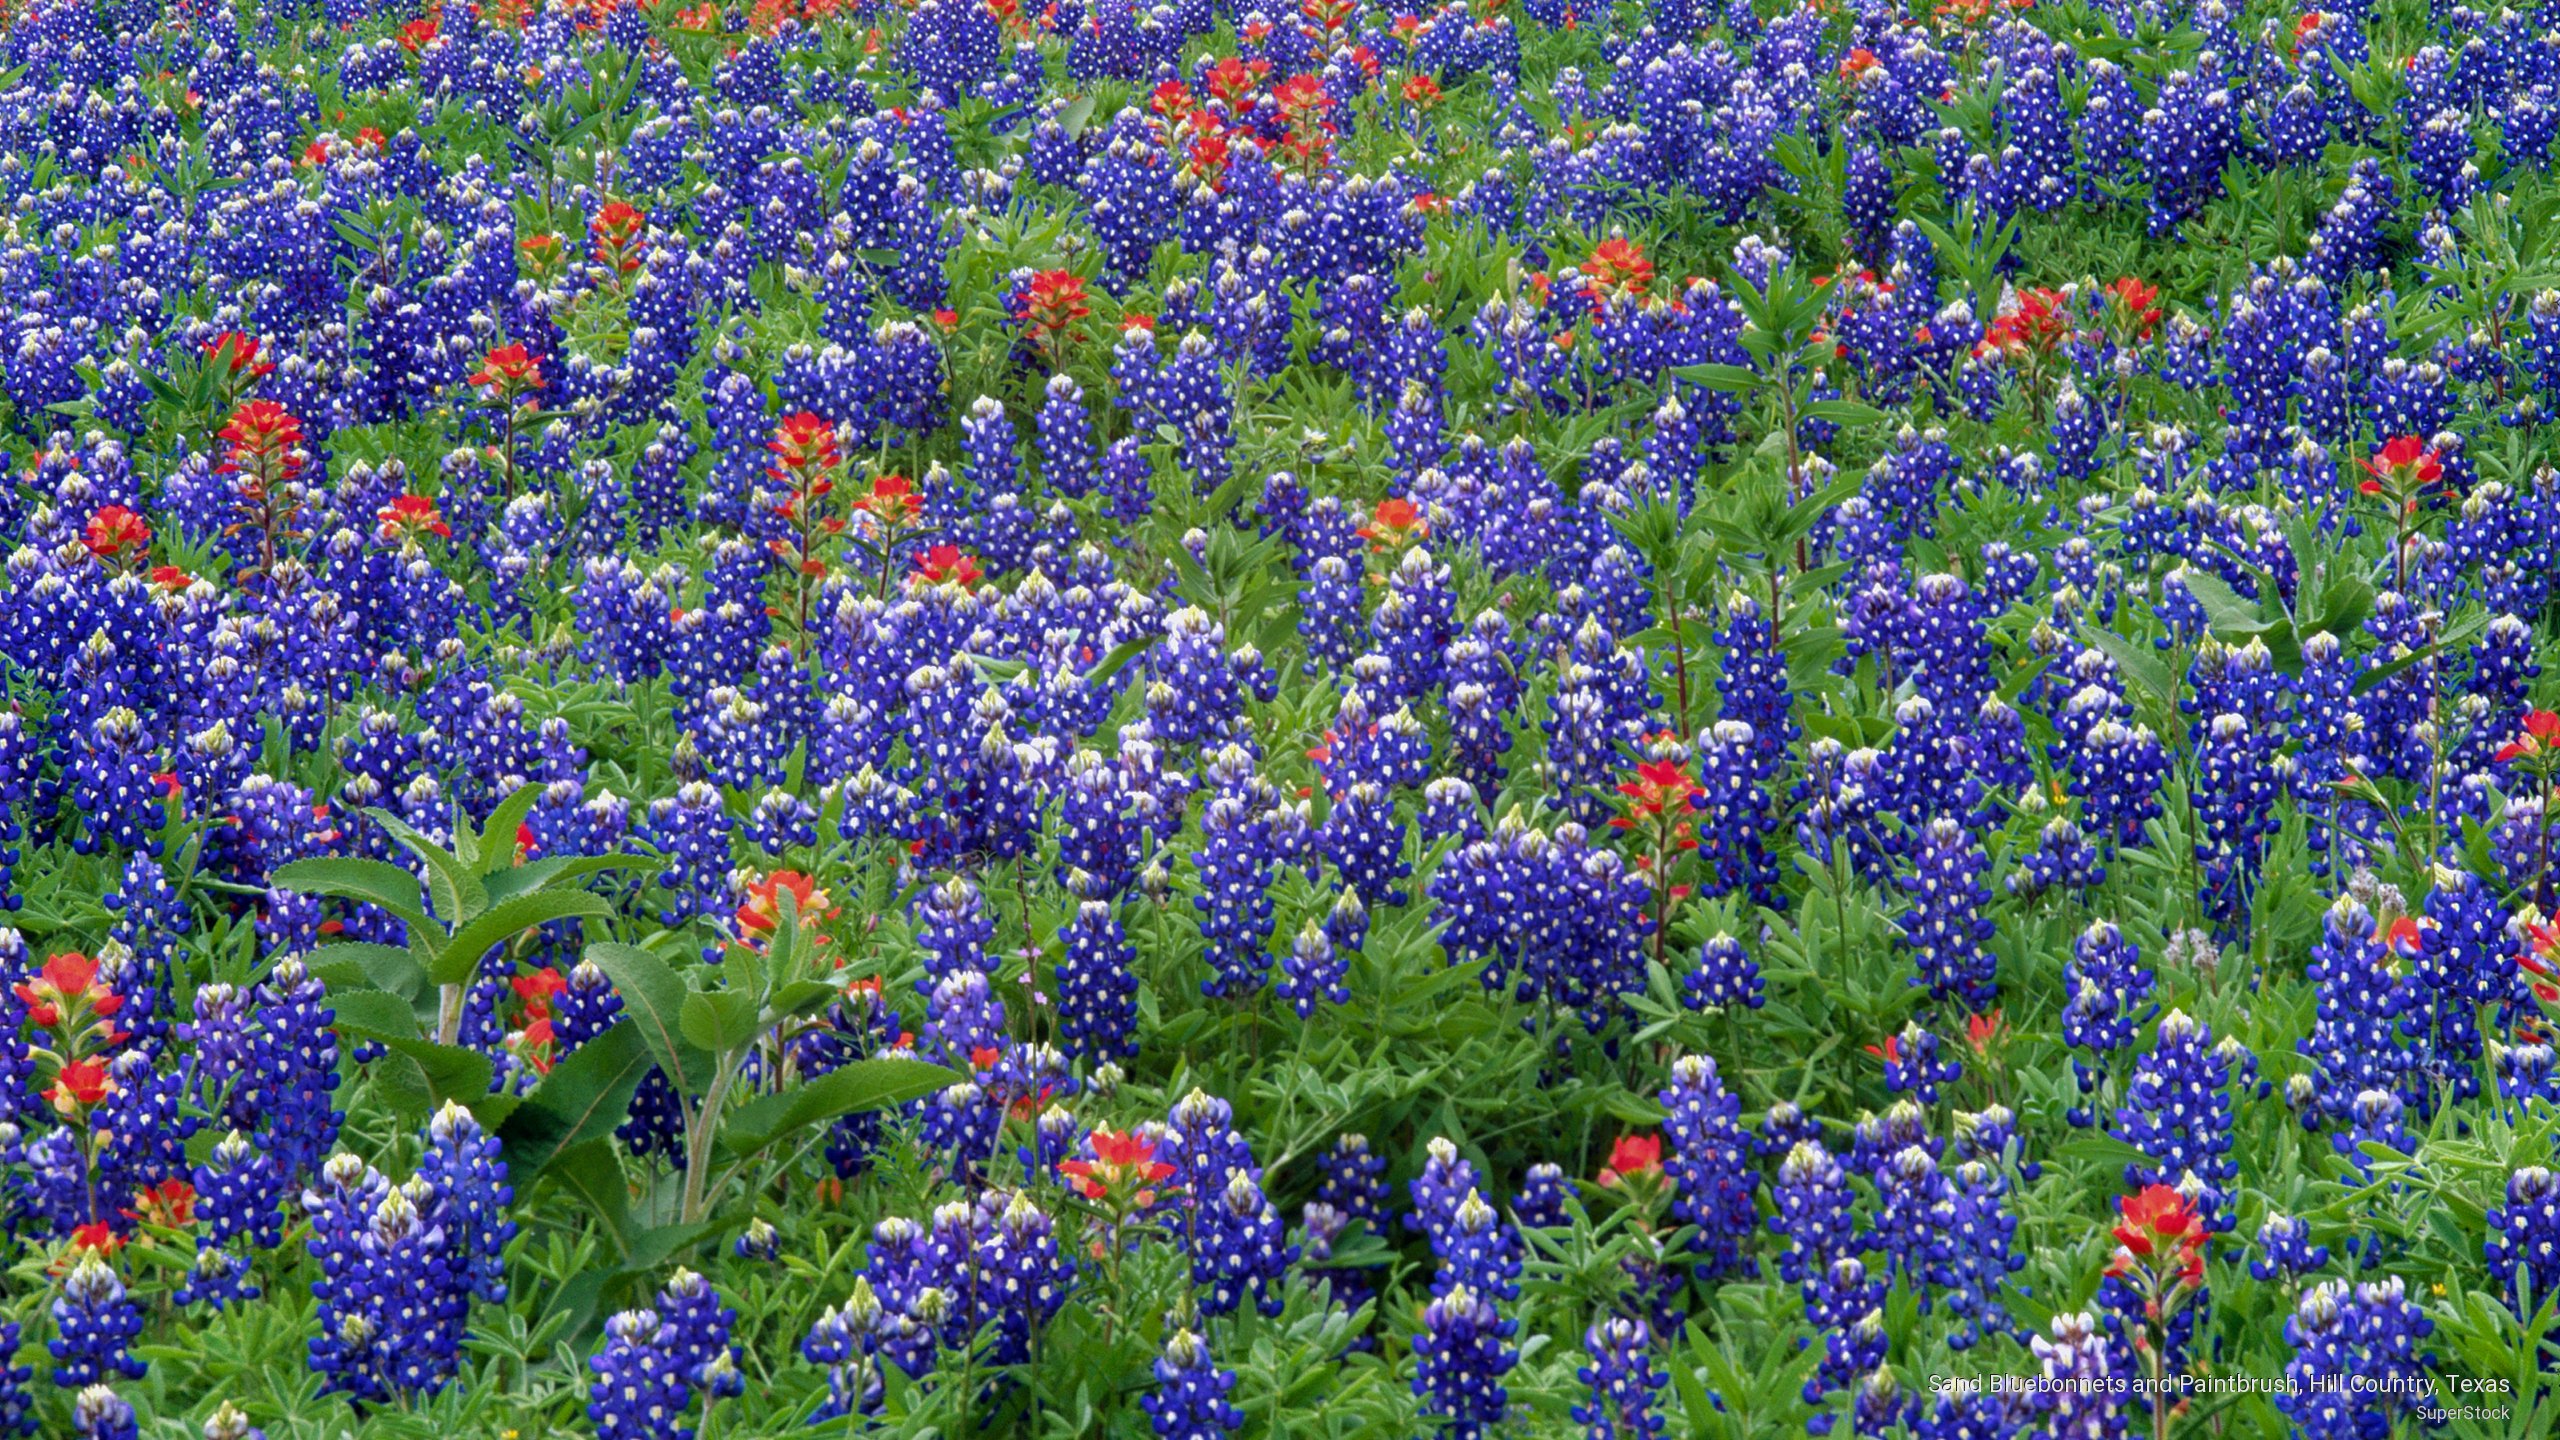 Wallpaper Sand Bluebons And Paintbrush Hill Country Texas